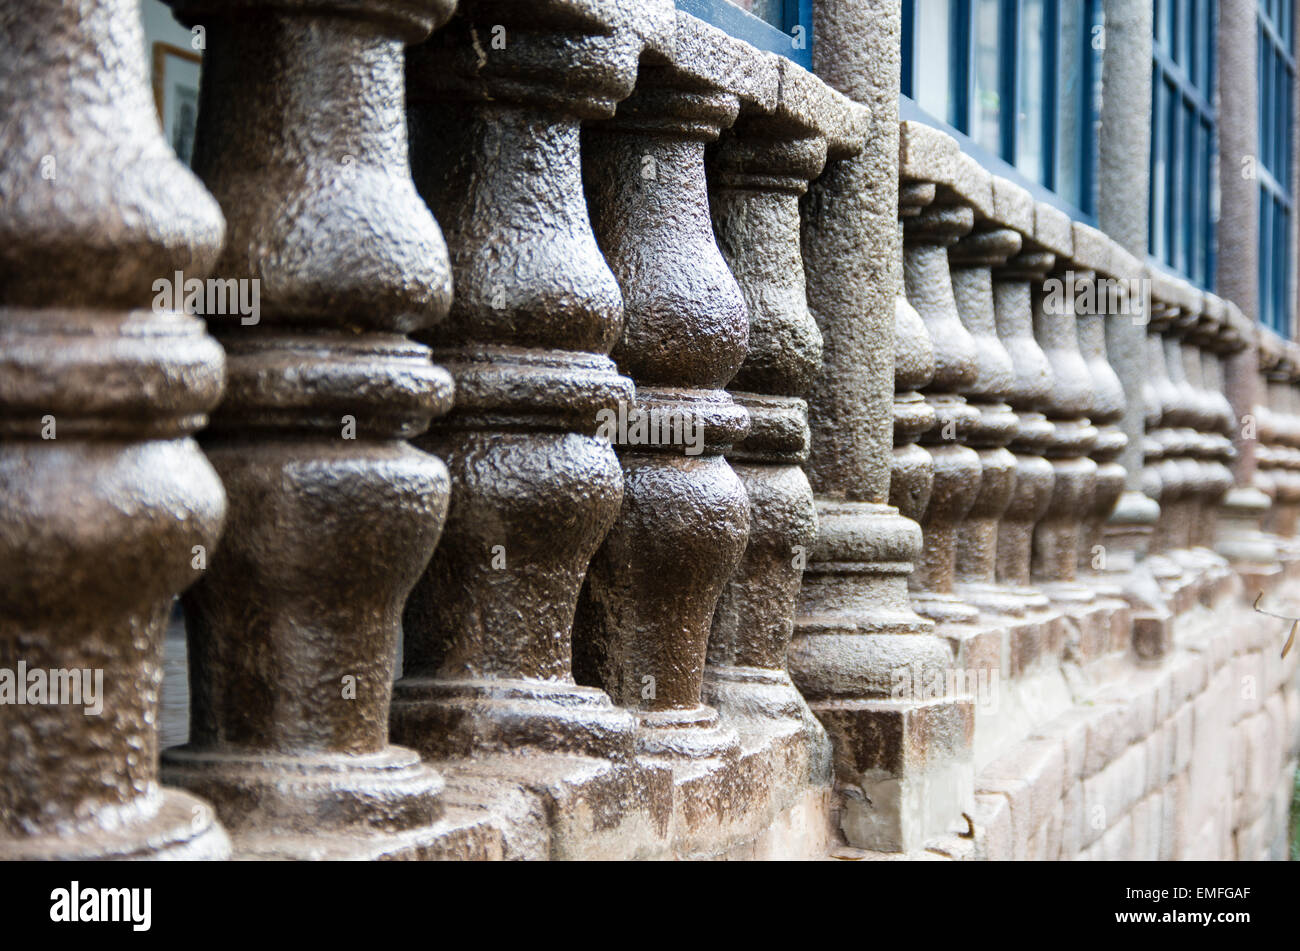 Spanish colonial architecture on a wall of Inca stone in Cusco, Peru. Stock Photo